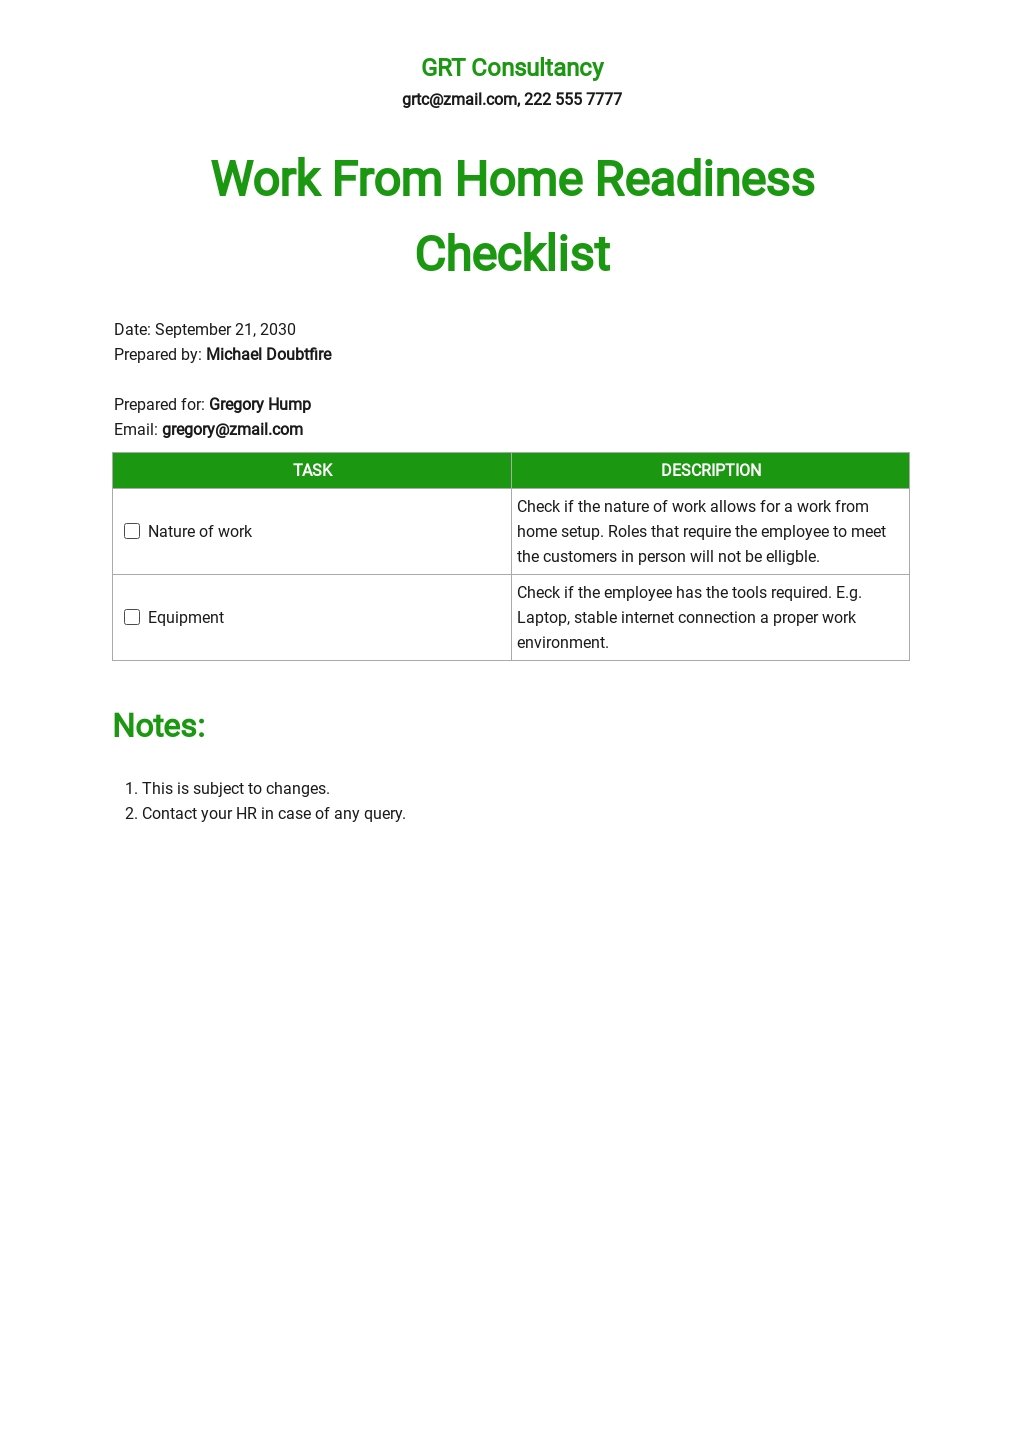 Free Work From Home Readiness Checklist Template.jpe